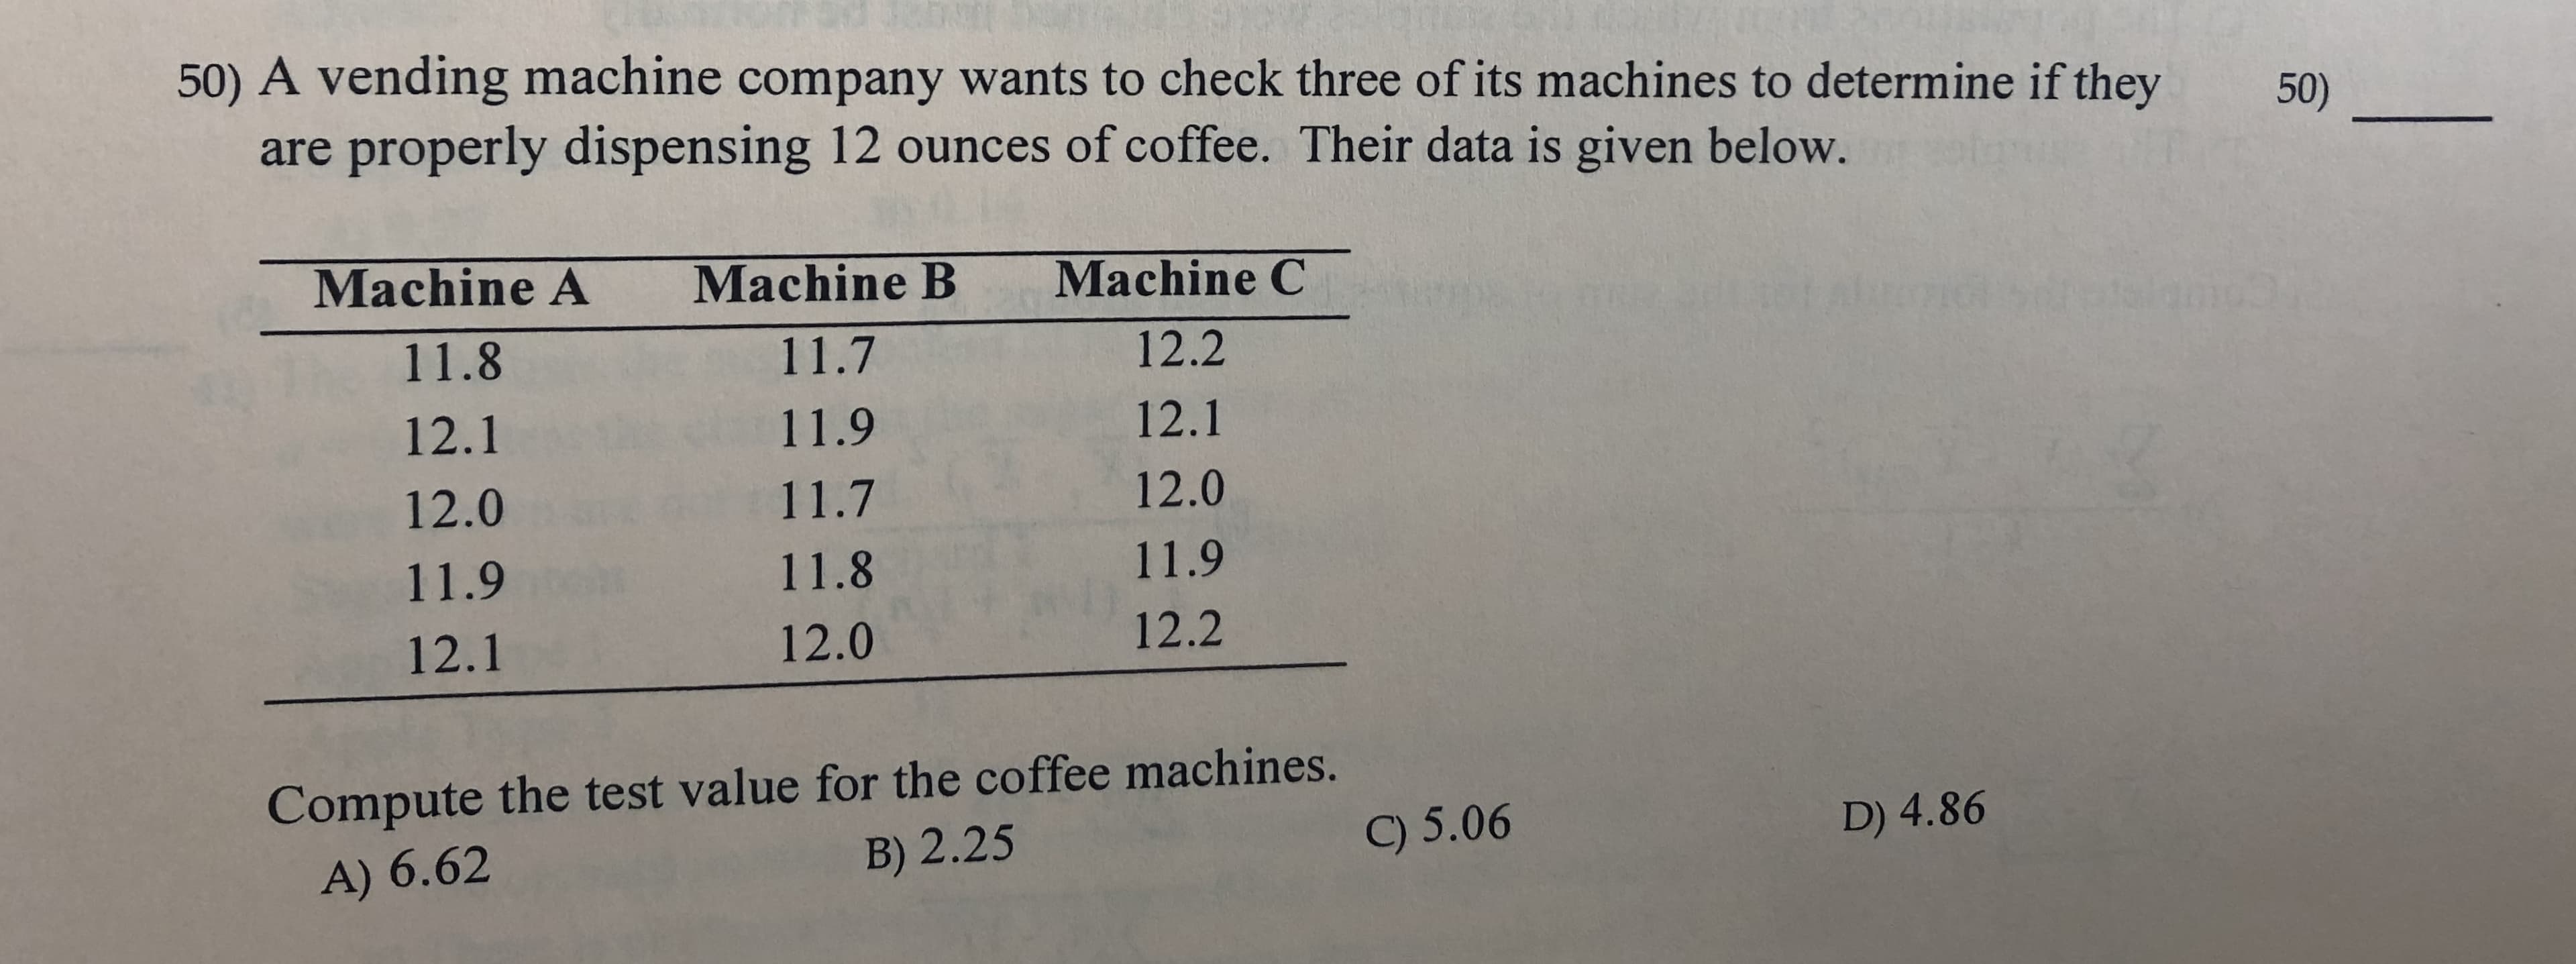 50) A vending machine company wants to check three of its machines to determine if they
50)
are properly dispensing 12 ounces of coffee. Their data is given below.
Machine A
Machine C
Machine B
11.8
11.7
12.2
12.1
11.9
12.1
12.0
12.0
11.7
11.9
11.8
11.9
12.2
12.0
12.1
Compute the test value for the coffee machines.
B) 2.25
9 5.06
D) 4.86
A) 6.62
